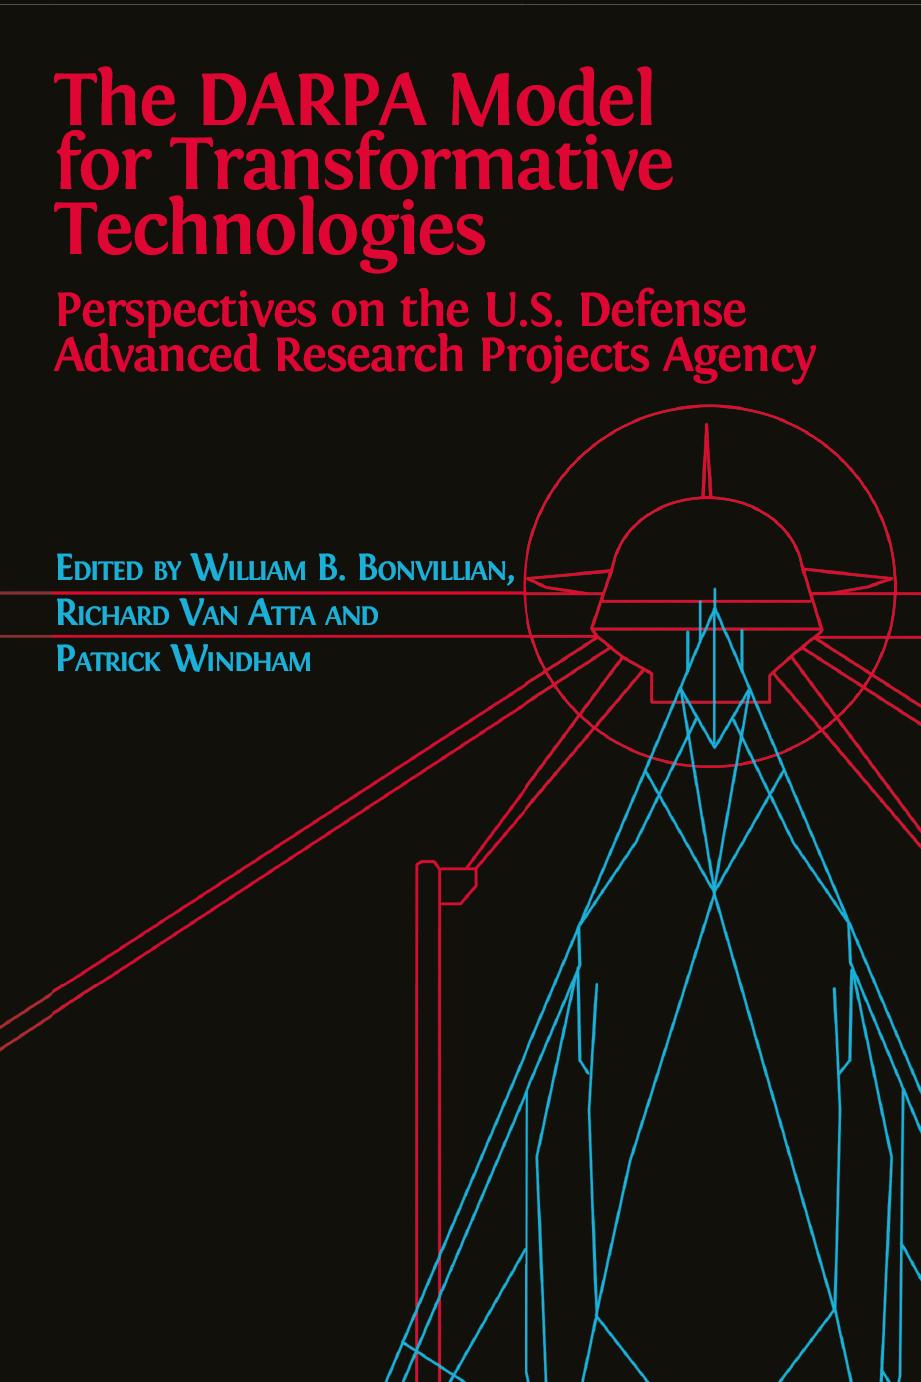 US Department of Defense Senior Research Project